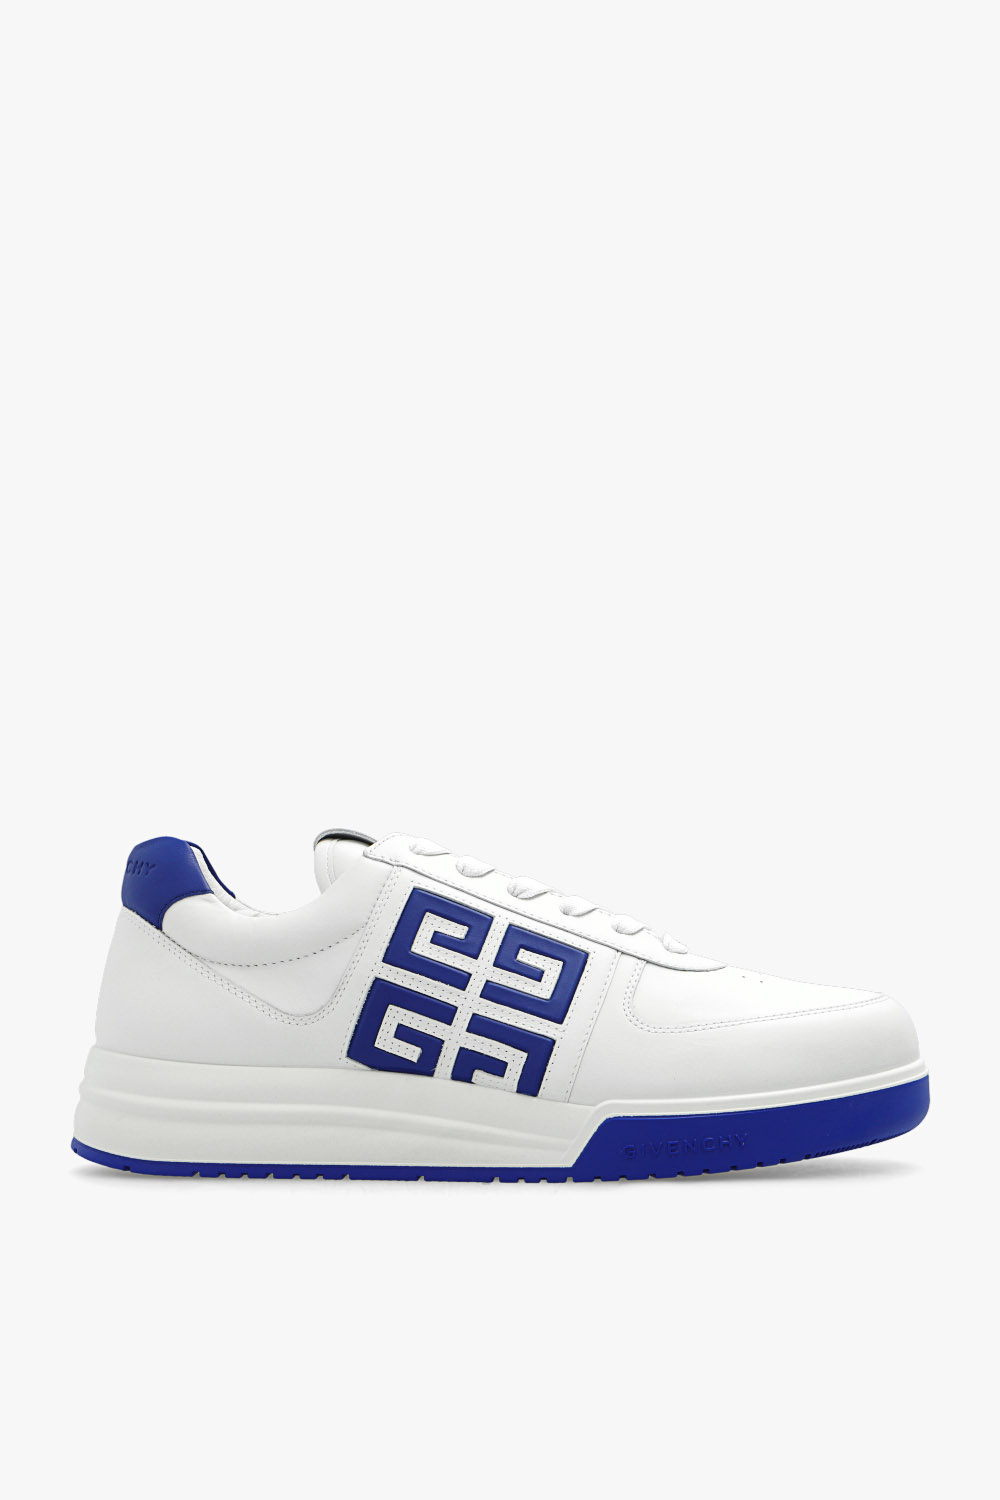 givenchy Men ‘G4’ sneakers